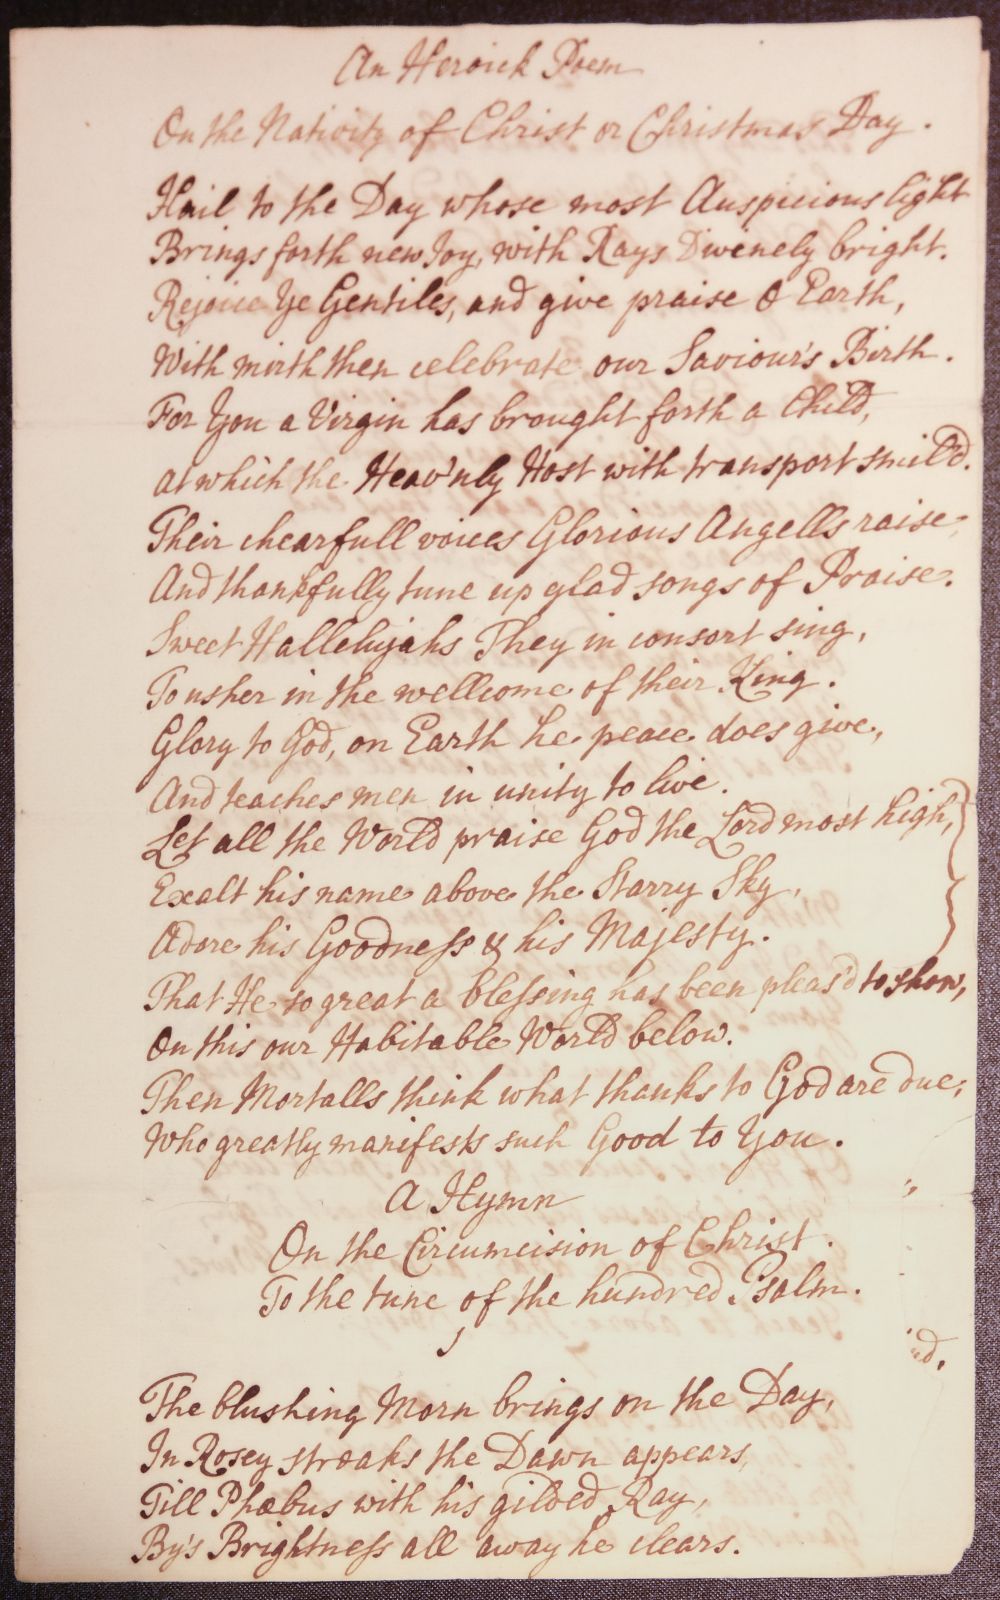 * Theology manuscript. 'A Heroic Poem. On the Nativity of Christ or Christmas Day', c.1730?